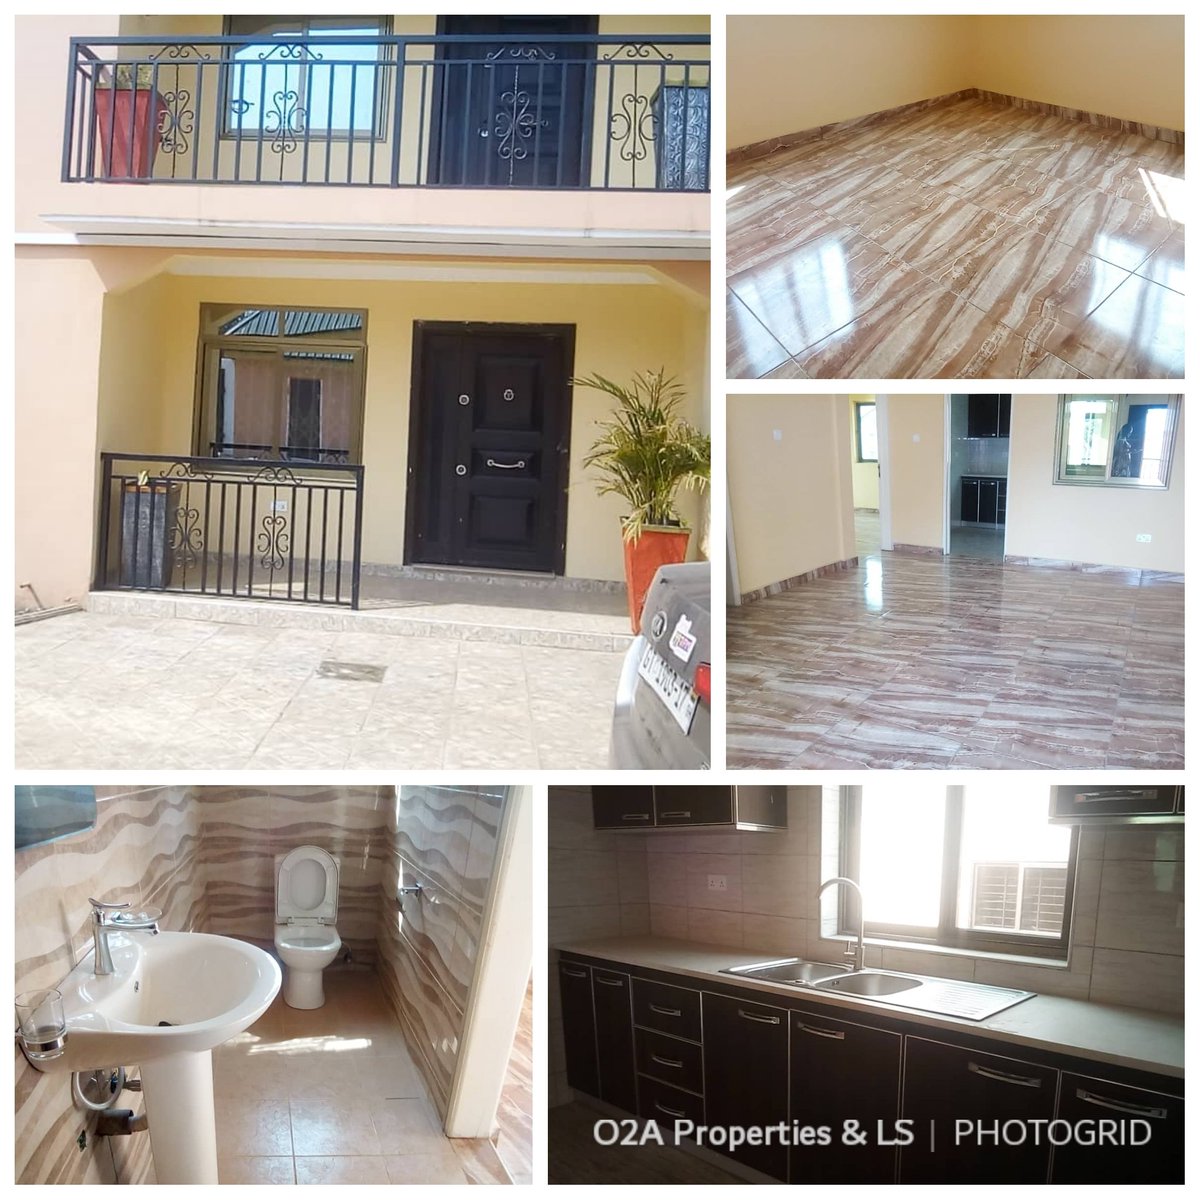 Executive newly built 2 bedroom apartment for rent at East Legon American House.

Price : $500.

Call : 0202795533

#realestateghana #rent #house #eastlegon #o2apropetiesgh #accraGhana #kumasi #shatta #sale #land #siteplan #indenture #americanhouse #accramall #westhillsmall